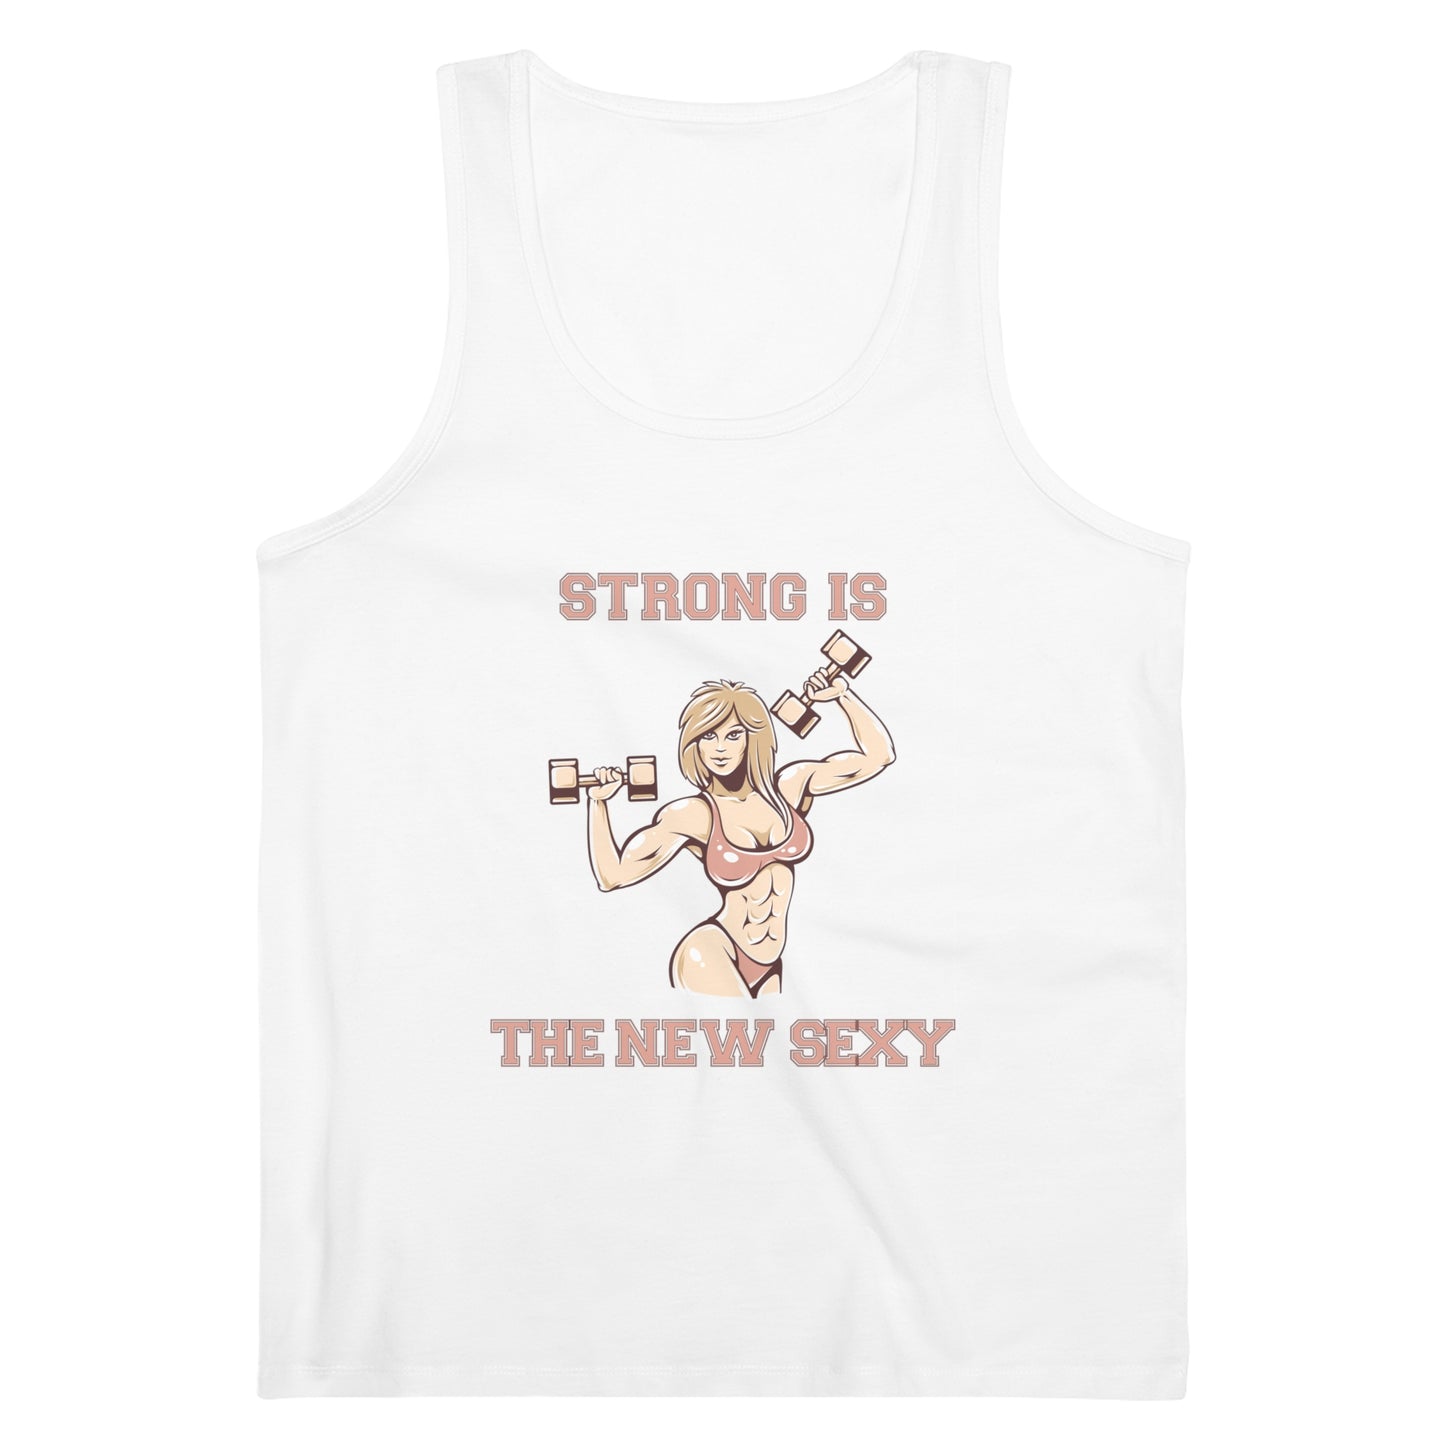 STRONG IS THE NEW SEXY x Tank